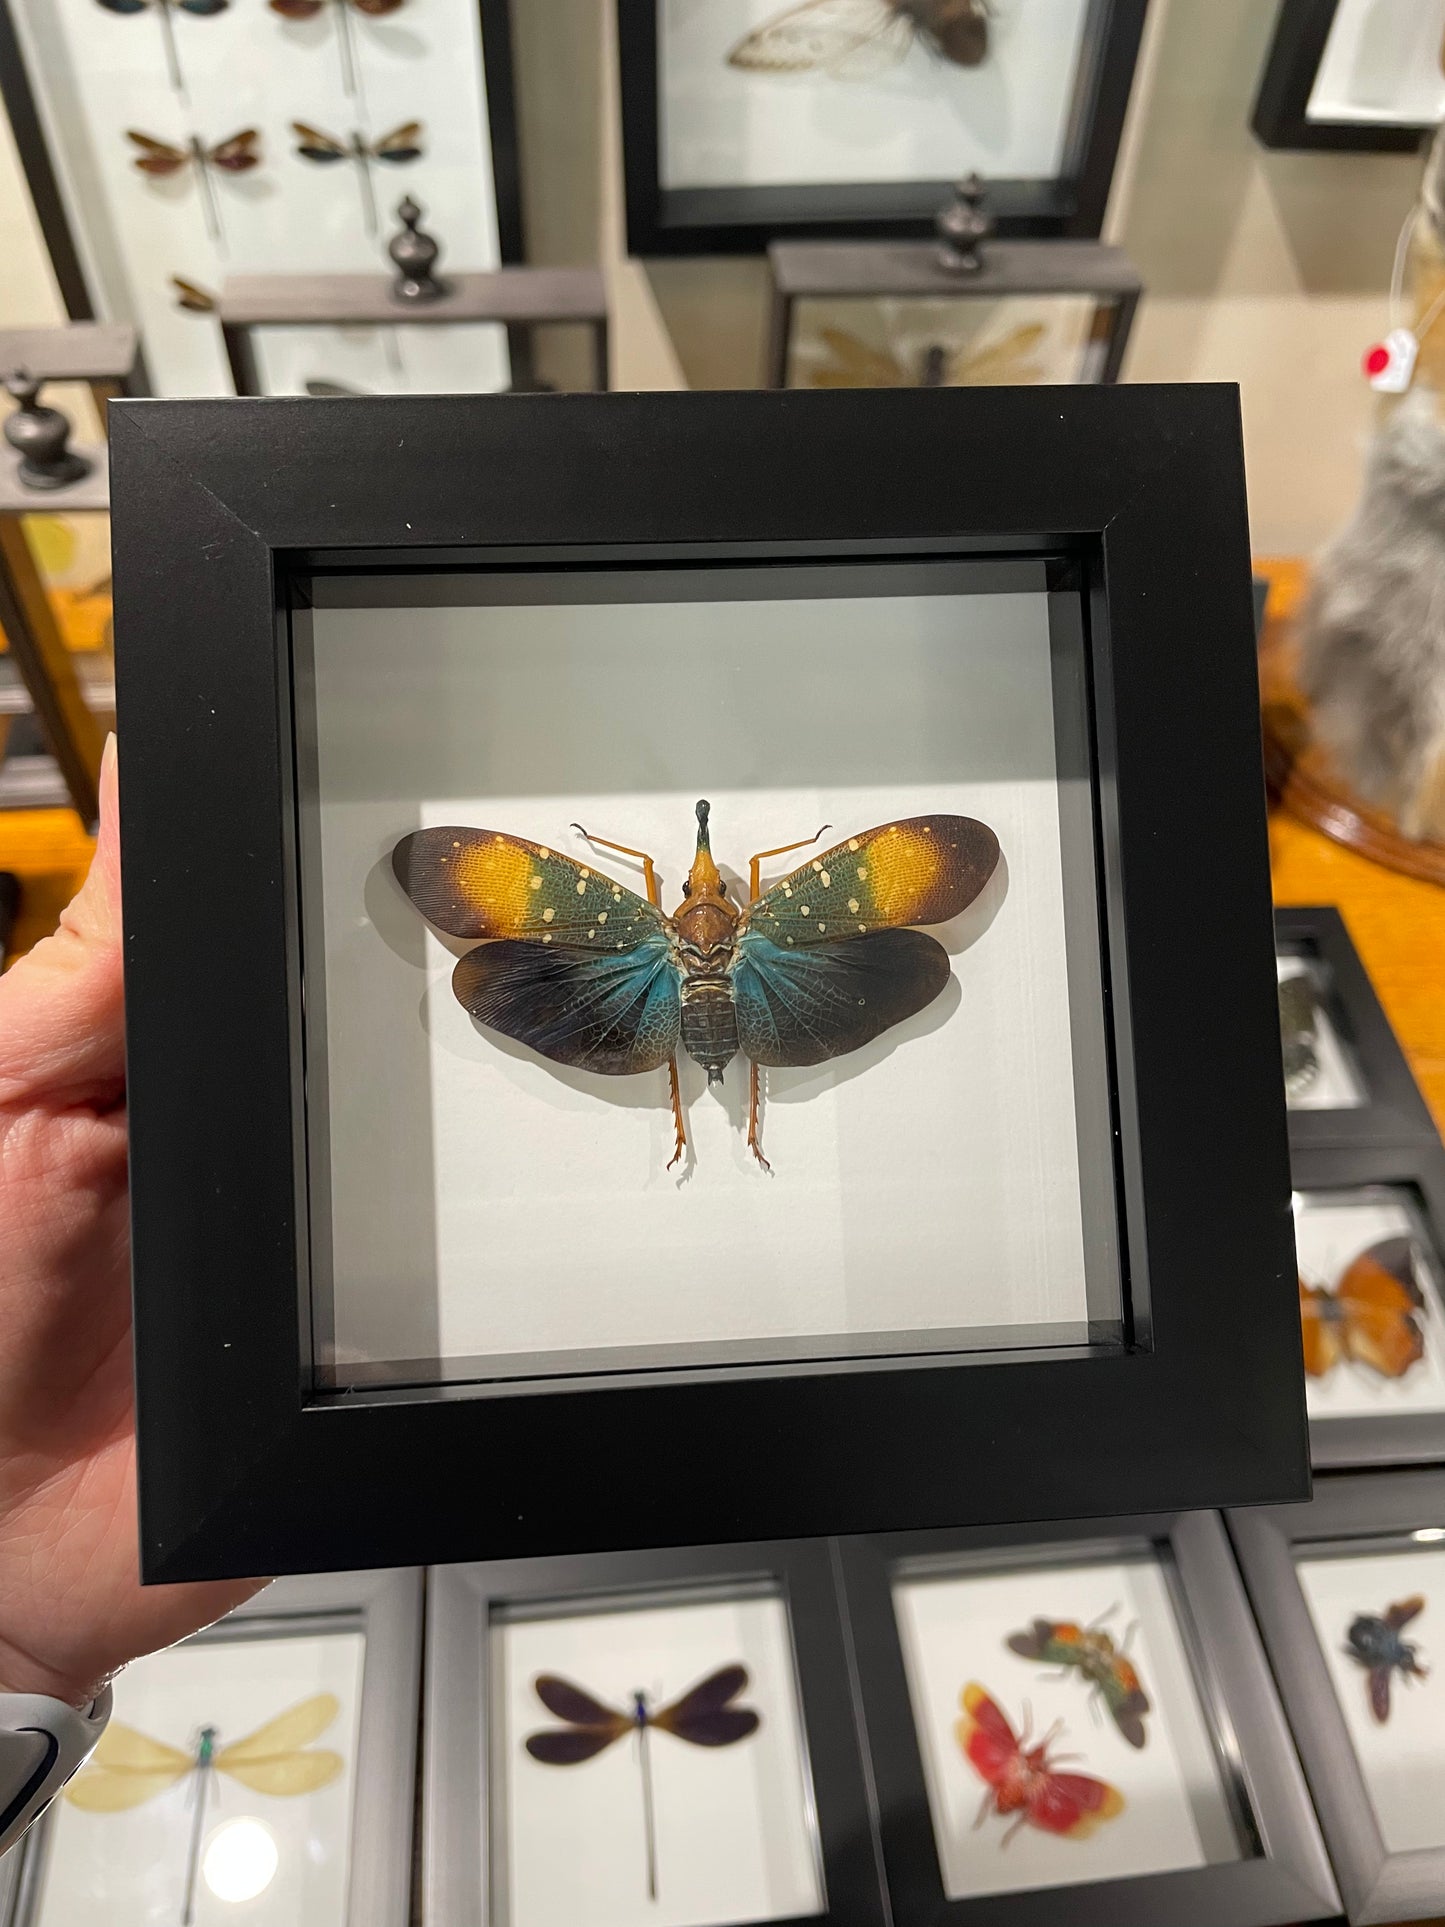 Butterflies/beetles/insects in small frame